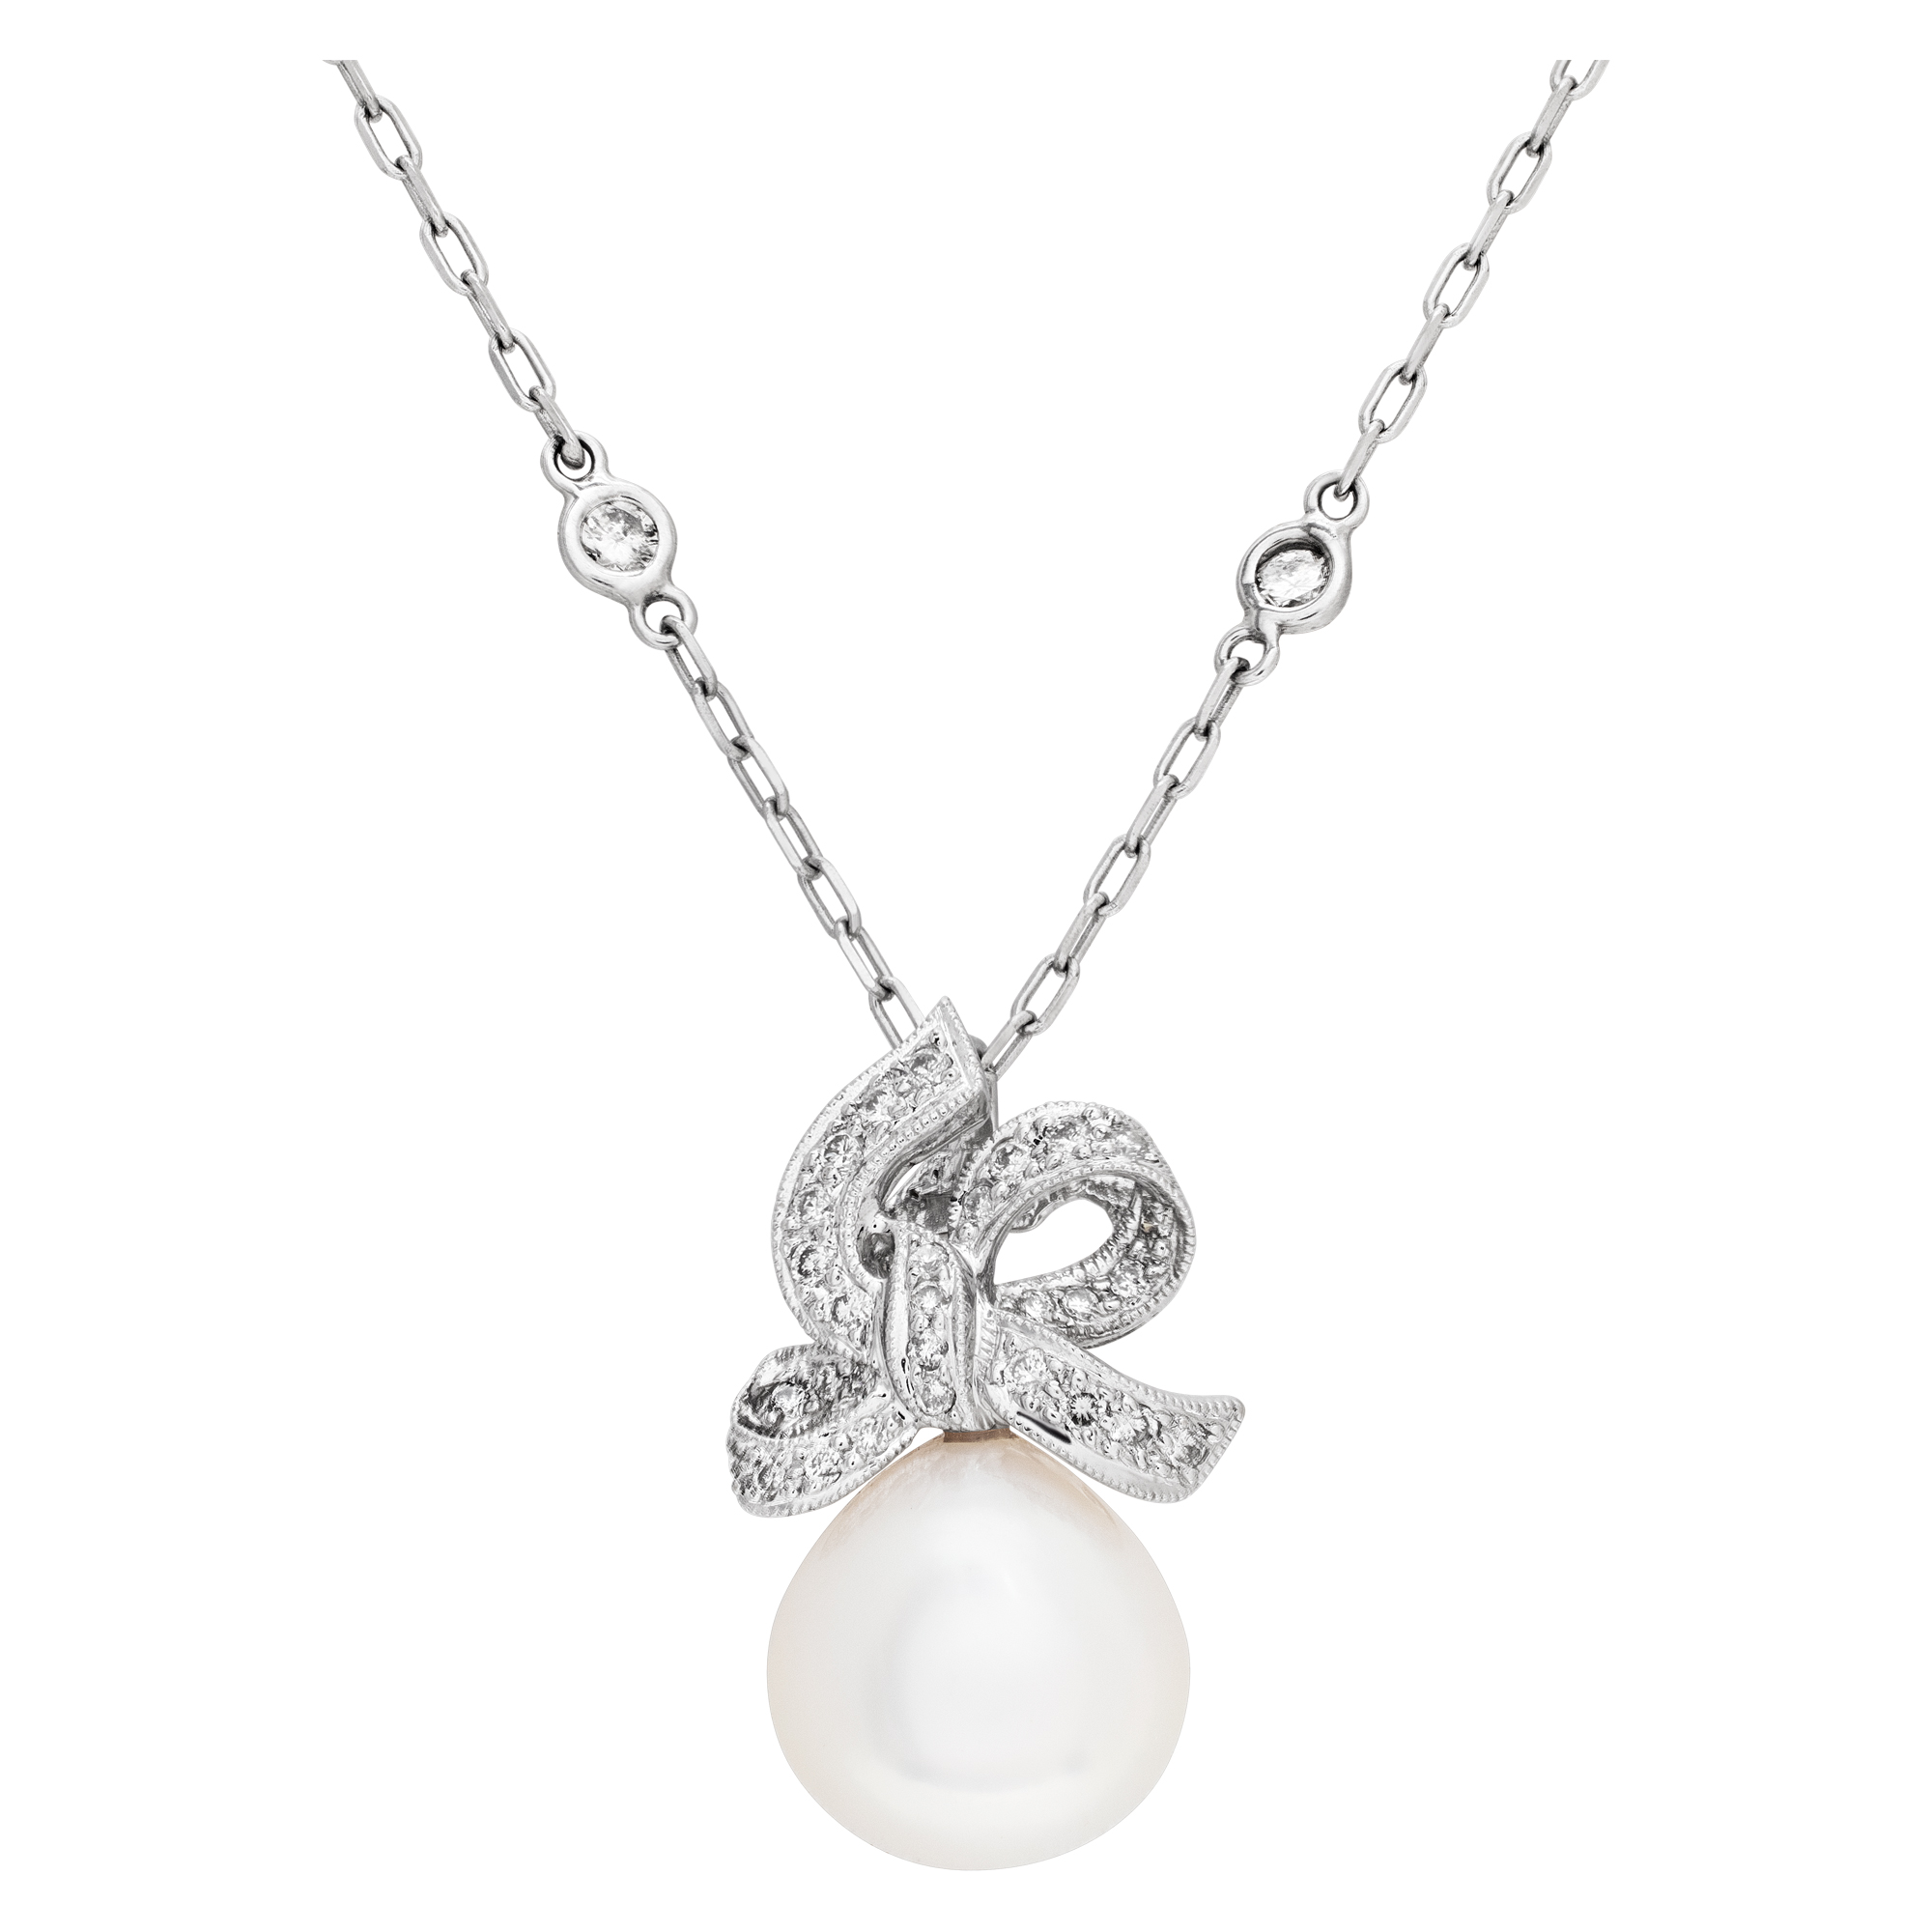 Fresh water pearl (12 x 12.5mm) and diamond pendant in 18k white gold with 14k white gold diamonds by the yard chain